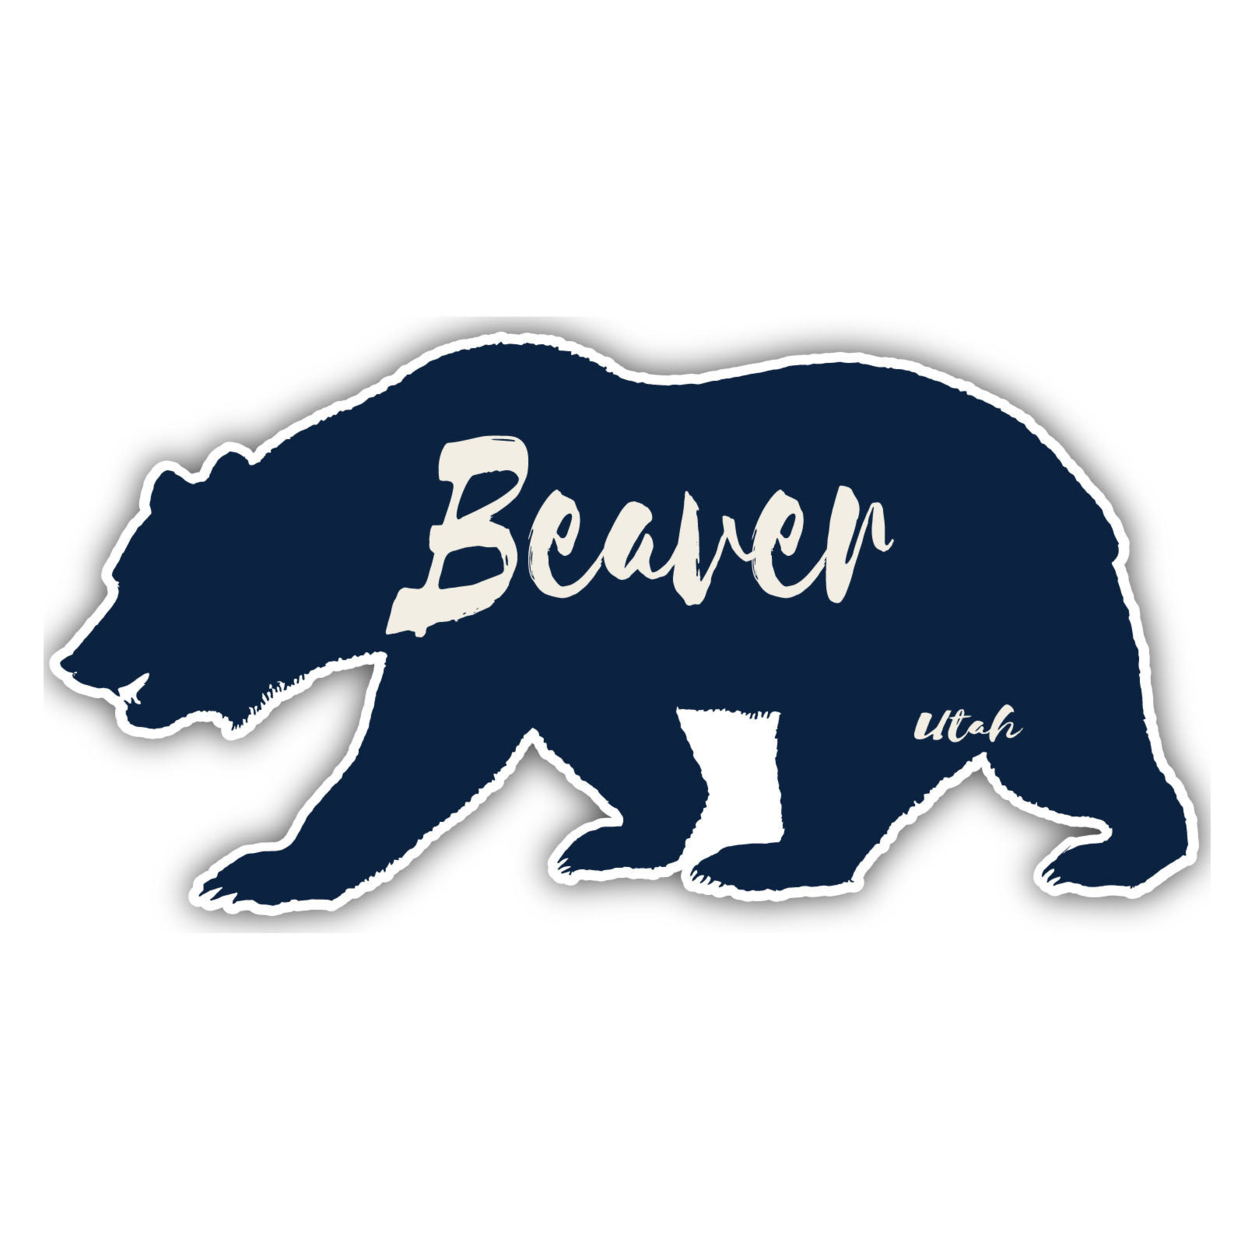 Beaver Utah Souvenir Decorative Stickers (Choose Theme And Size) - 4-Pack, 6-Inch, Adventures Awaits